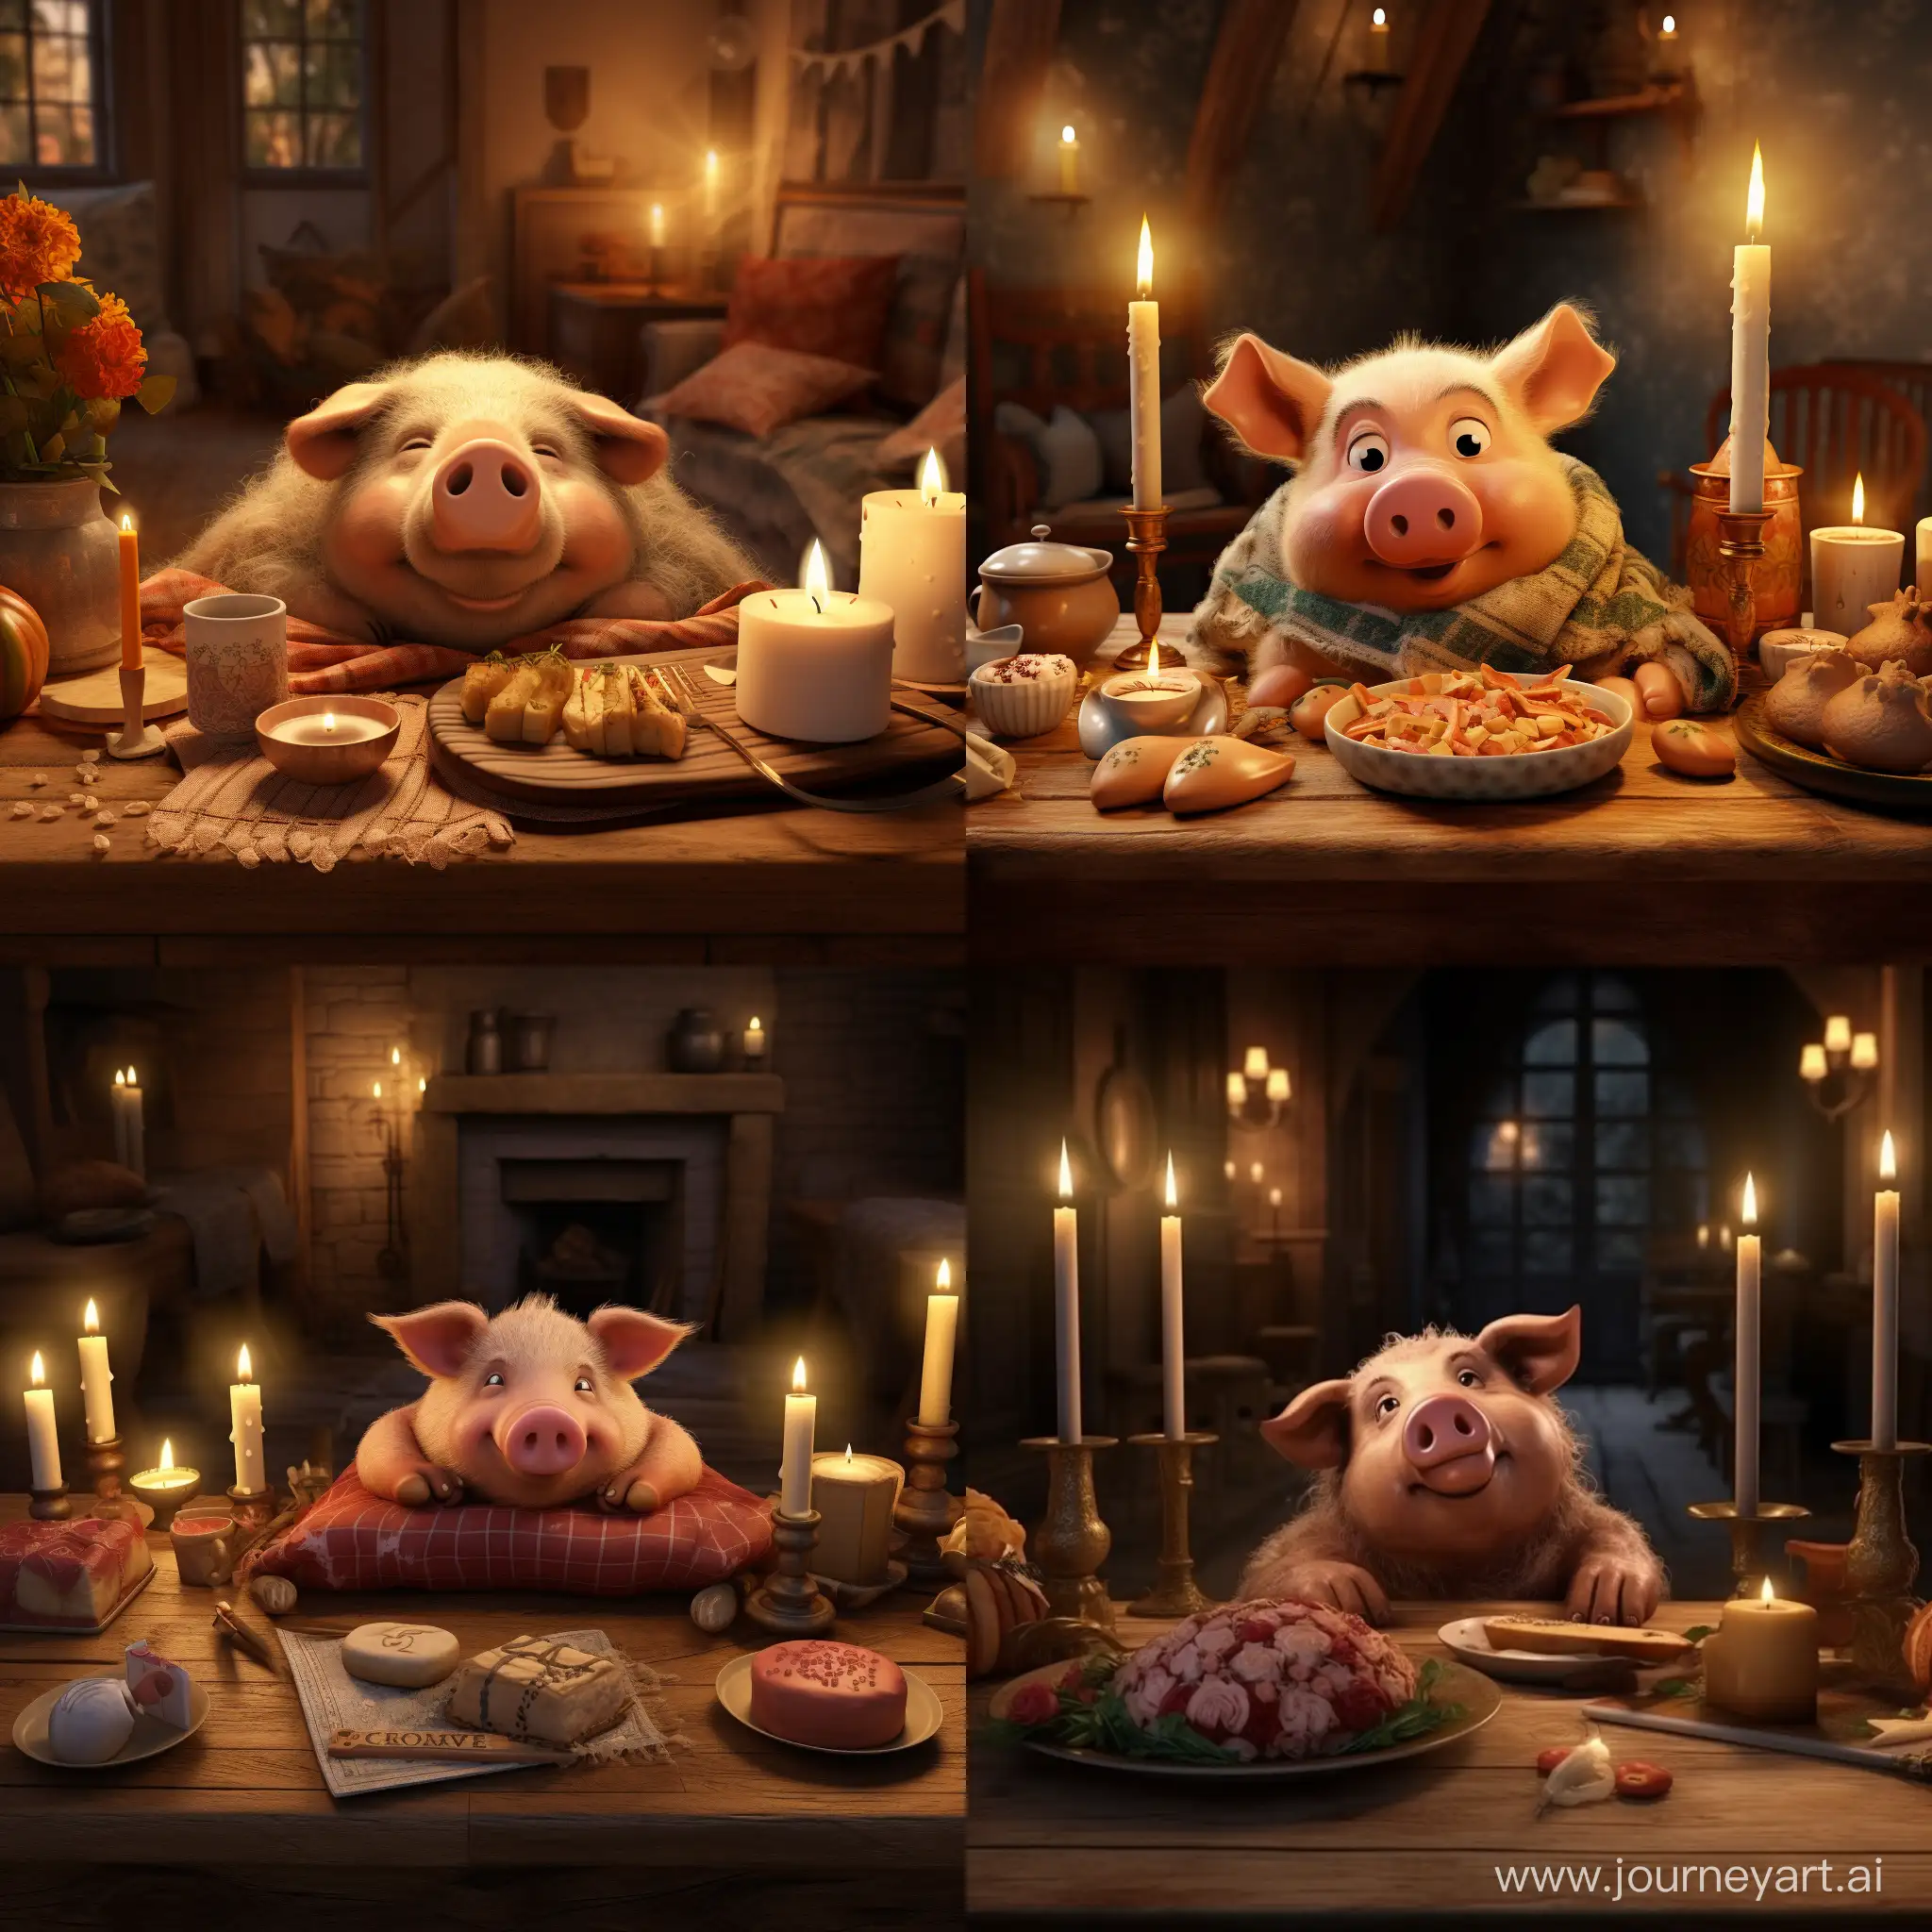 Roast-Pig-on-Table-with-Candlelit-Ambiance-3D-Animation